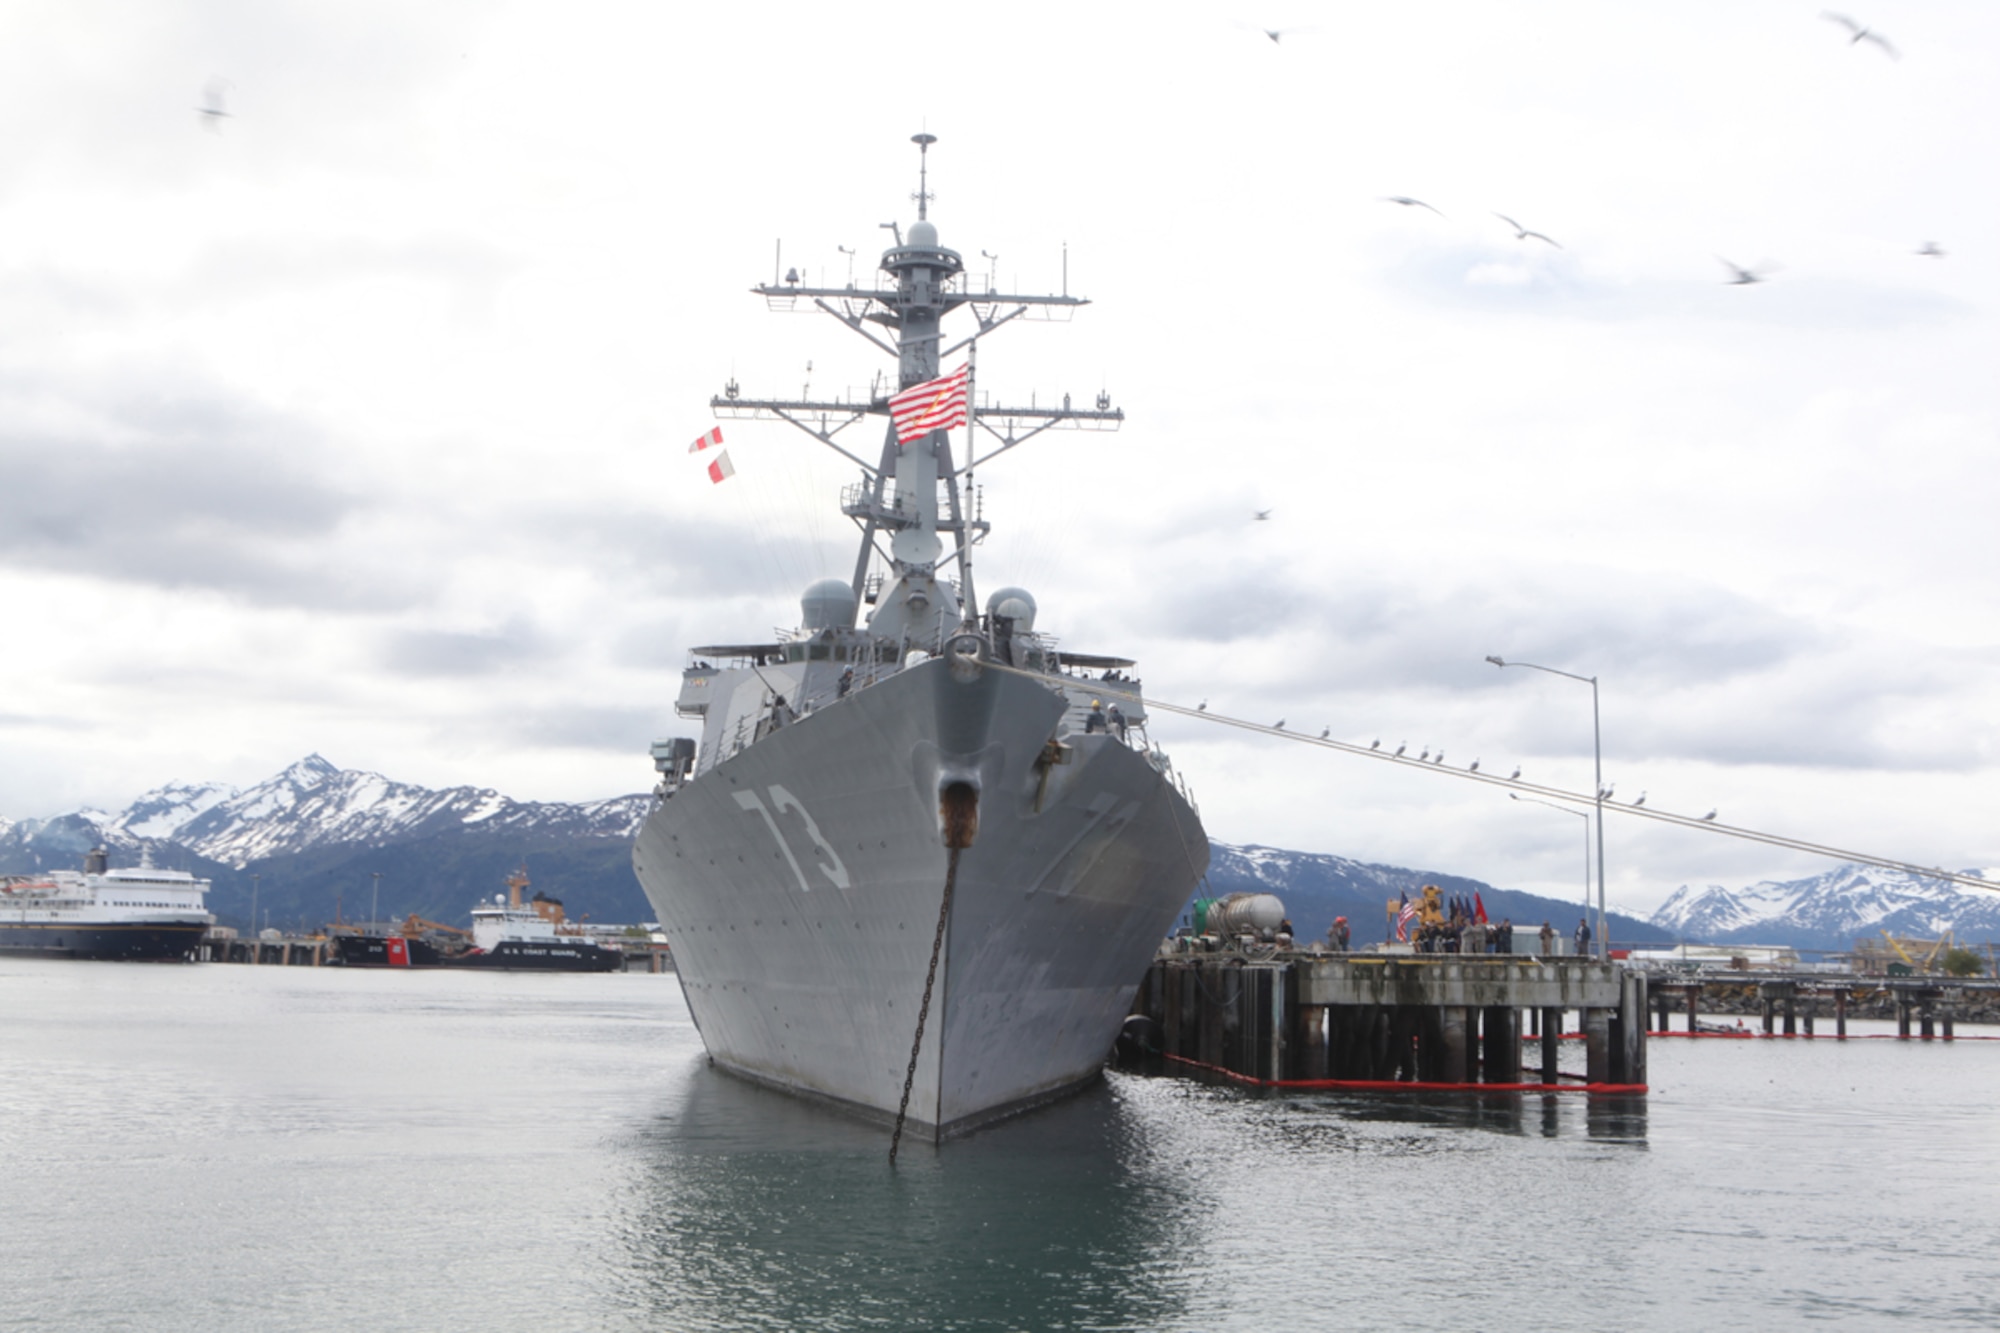 HOMER, Alaska - The USS Decatur (DDG-73) sits docked in Homer, Alaska, before the start of Exercise Northern Edge '11, June 12, 2011. The Decatur is a Arleigh Burke-class guided-missile destroyer ship, which has SPY radar on board to locate and track aircraft and missiles. (U.S. Marines photo/Sgt. Deanne Hurla)
